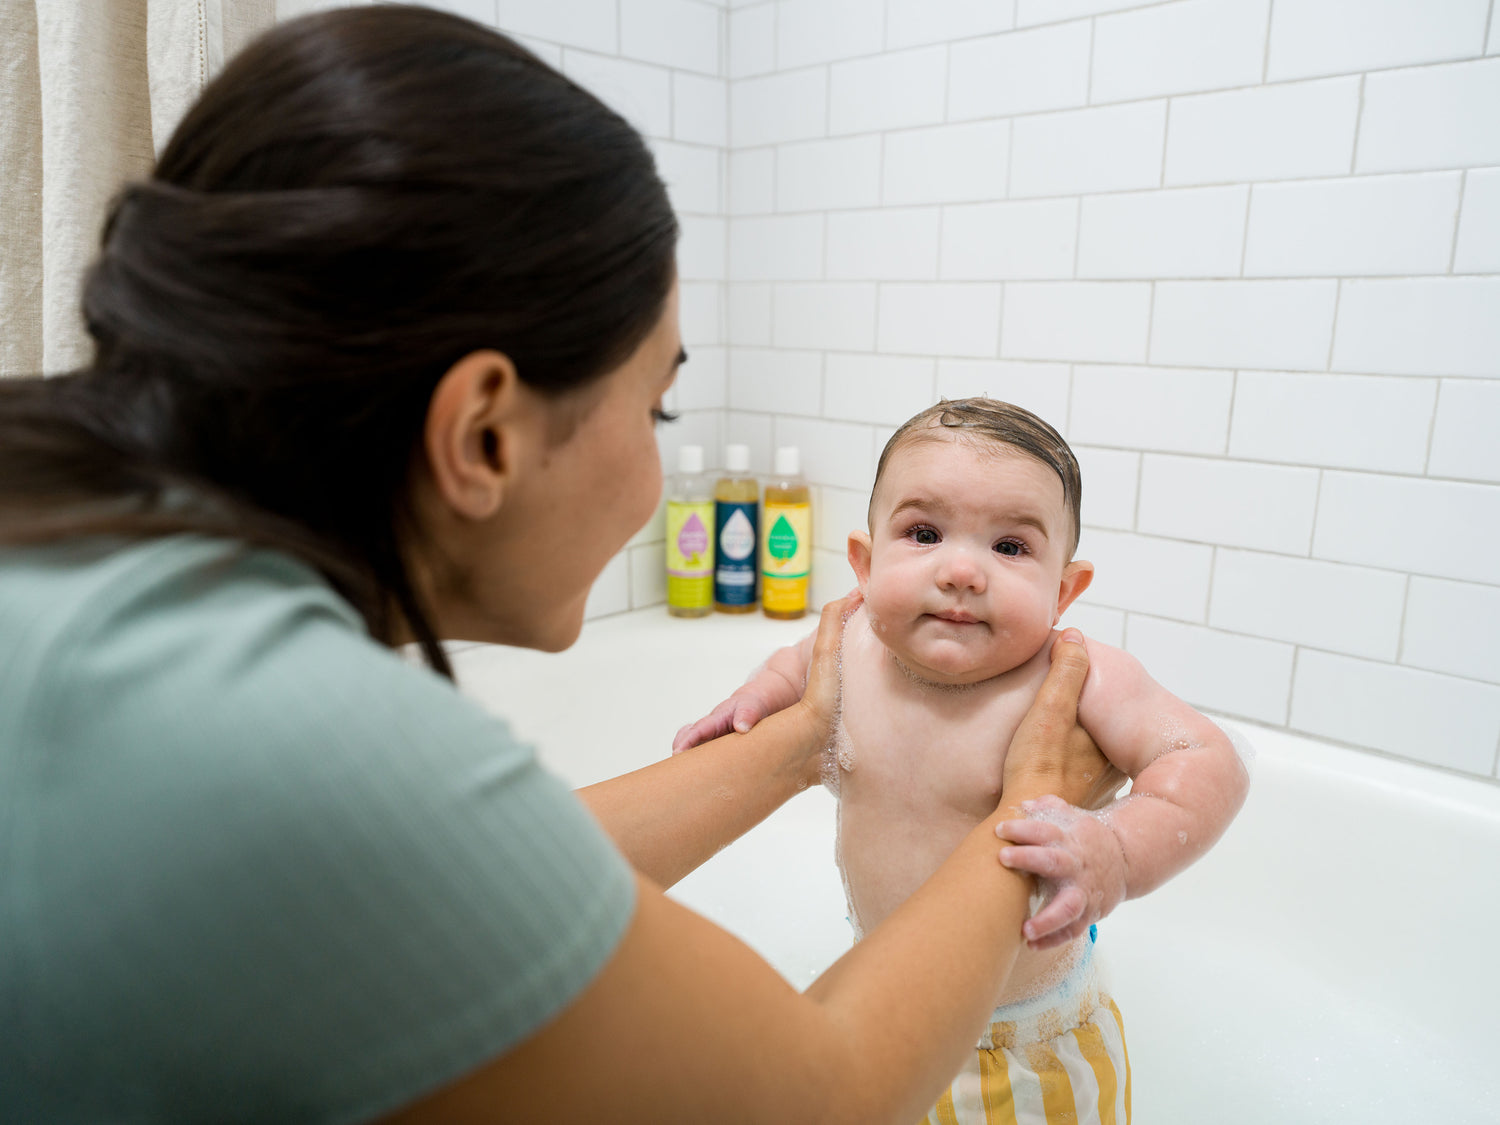 From Itchy to Soothed: A Parent's Guide for Eczema